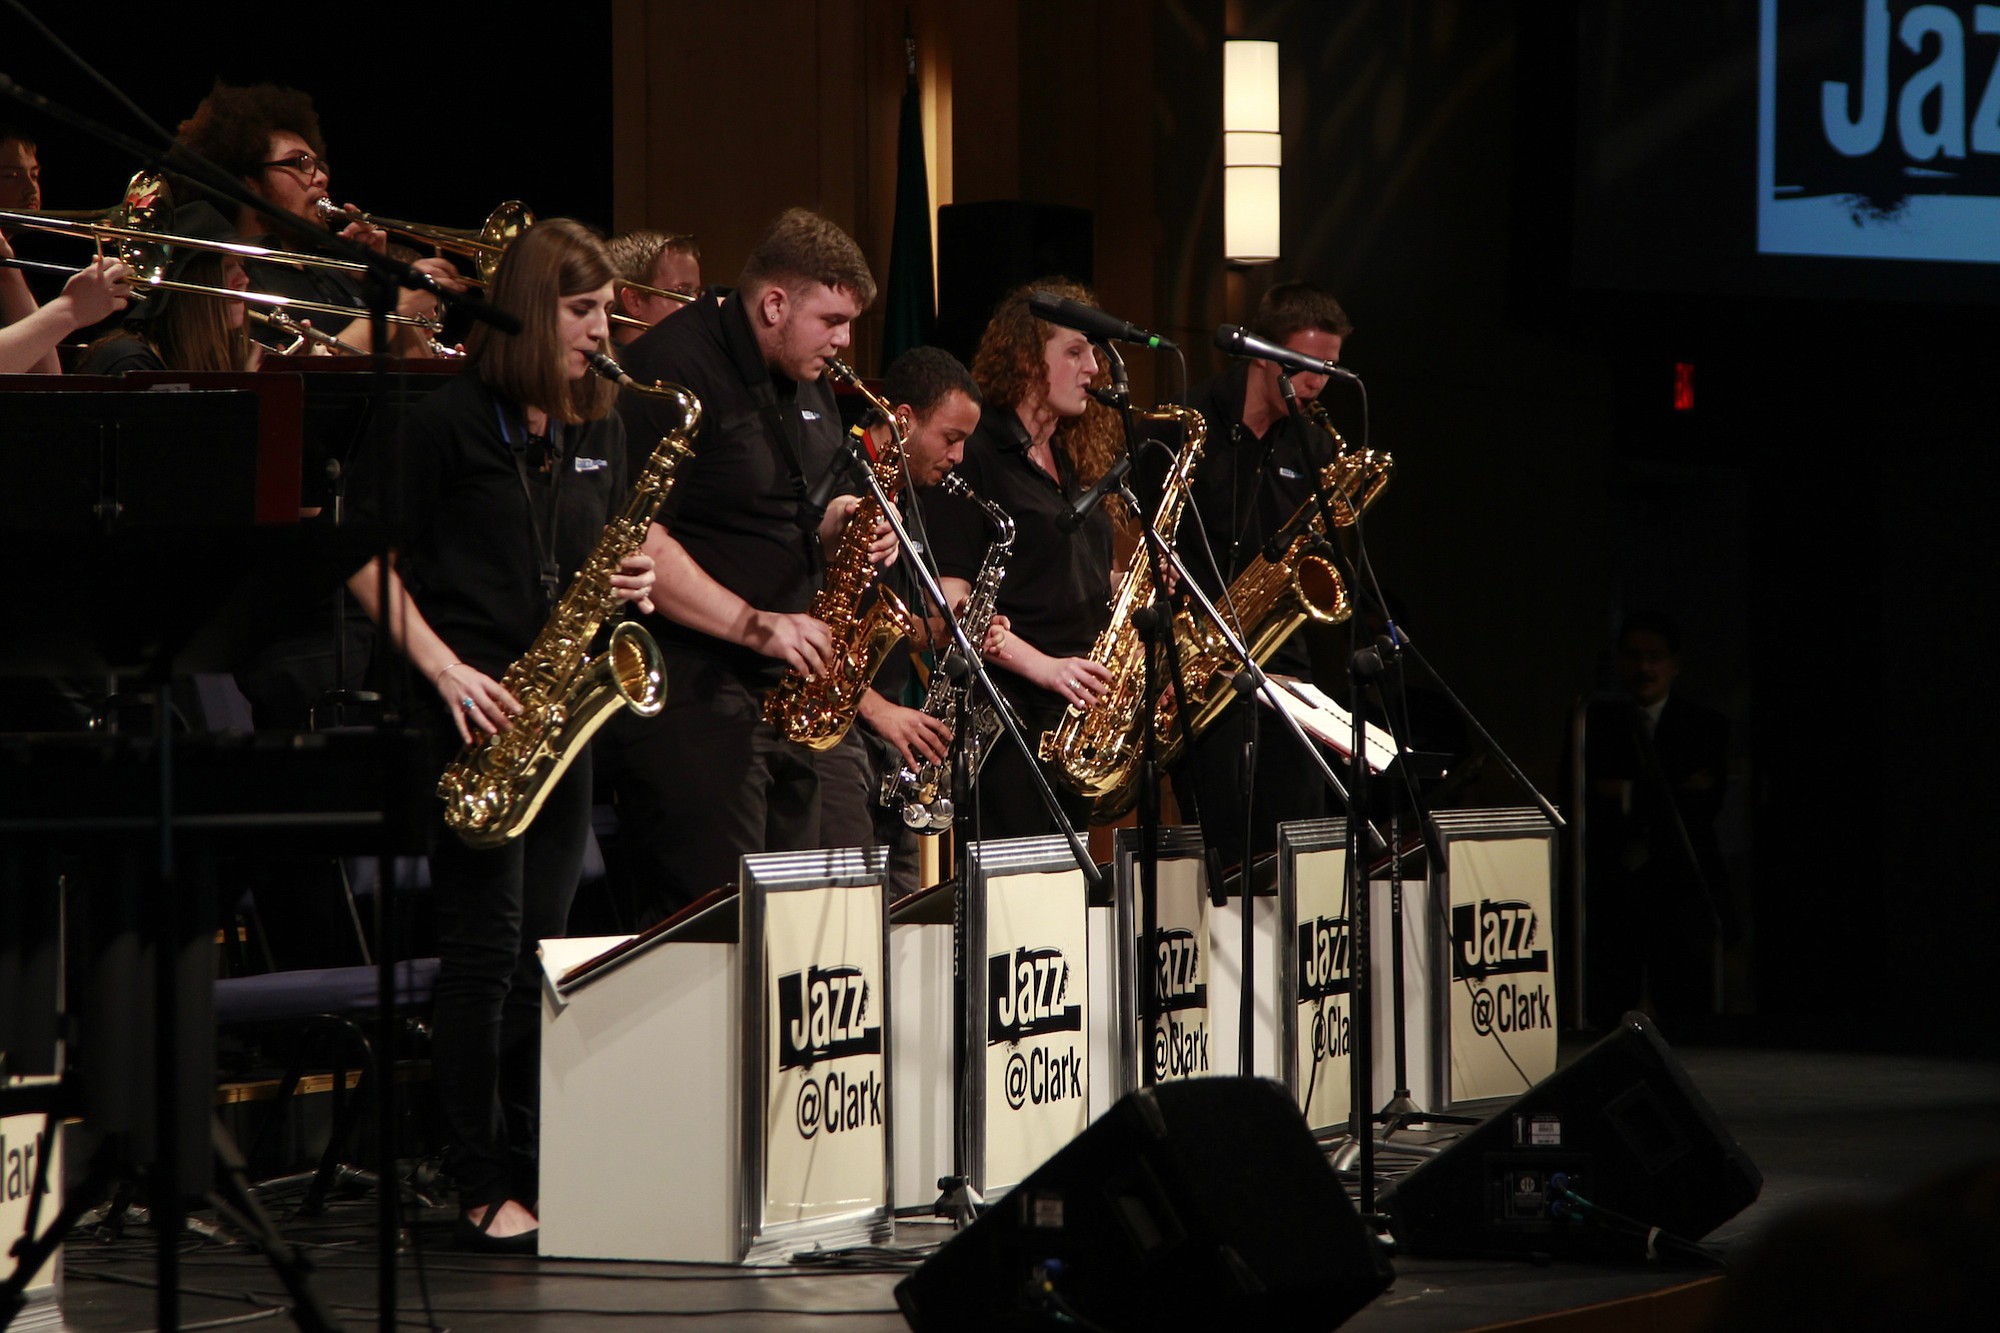 Clark College hosts its 53rd annual jazz festival, featuring school bands from around the area.